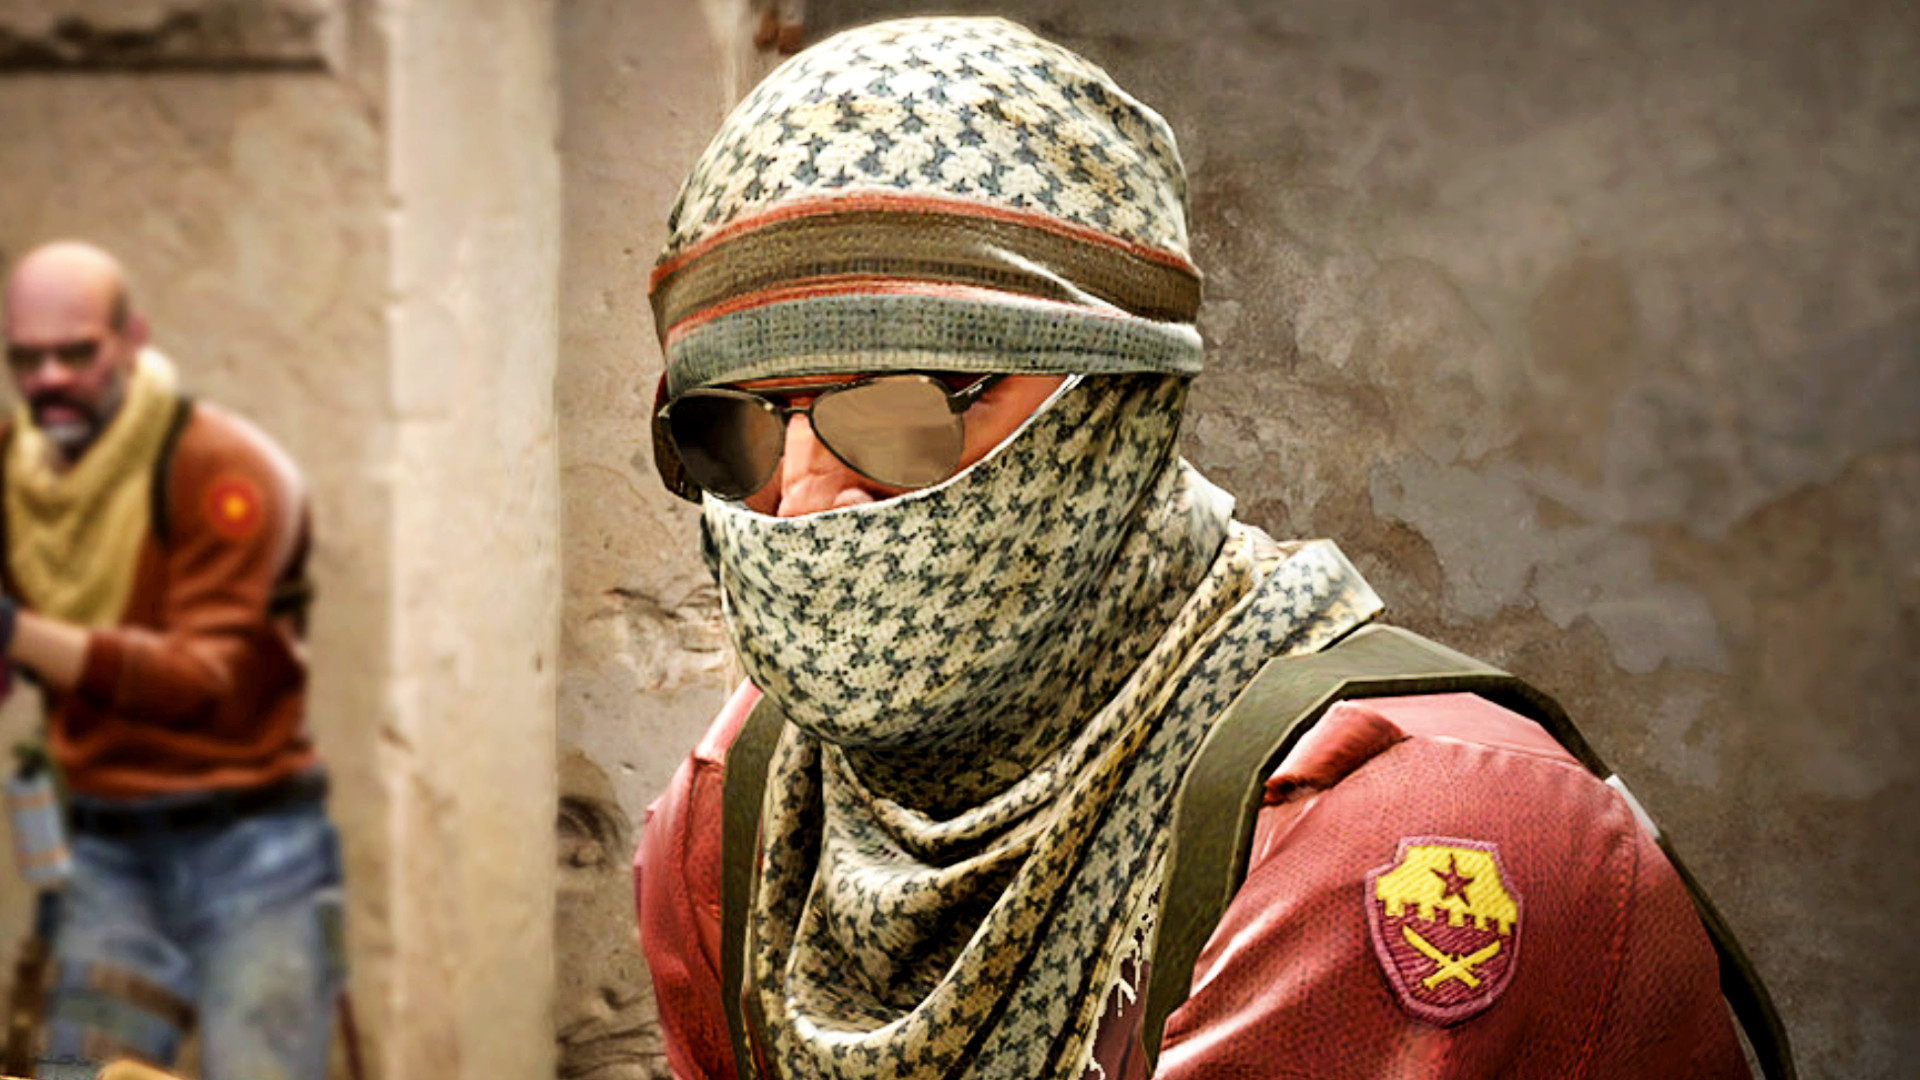 Counter-Strike 2 releases on Steam, but can it beat CS:GO's all-time peak?